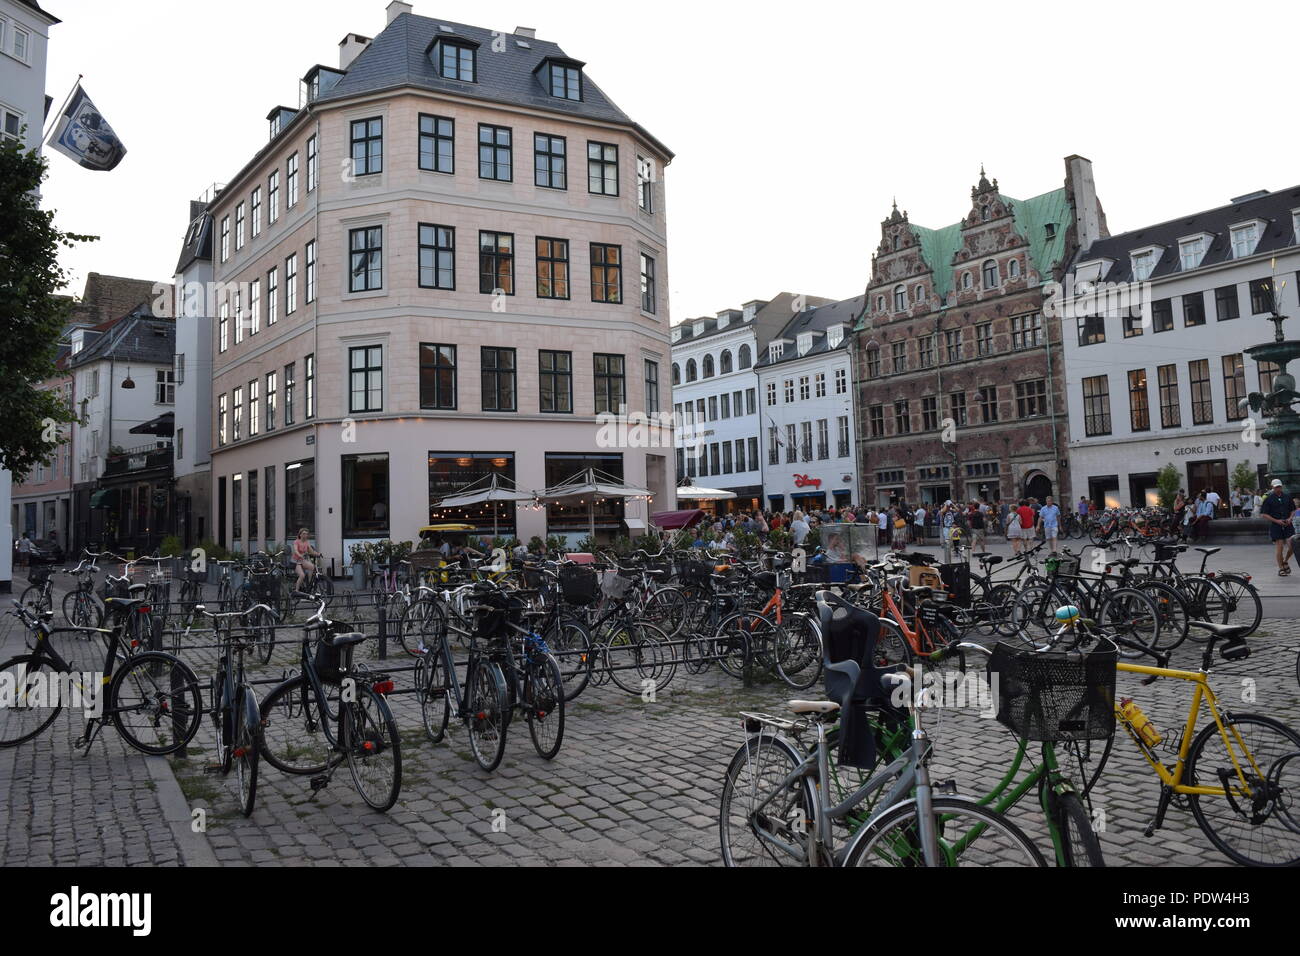 A Crowd of Parked Bicycles in Copenhagen, Denmark Stock Photo